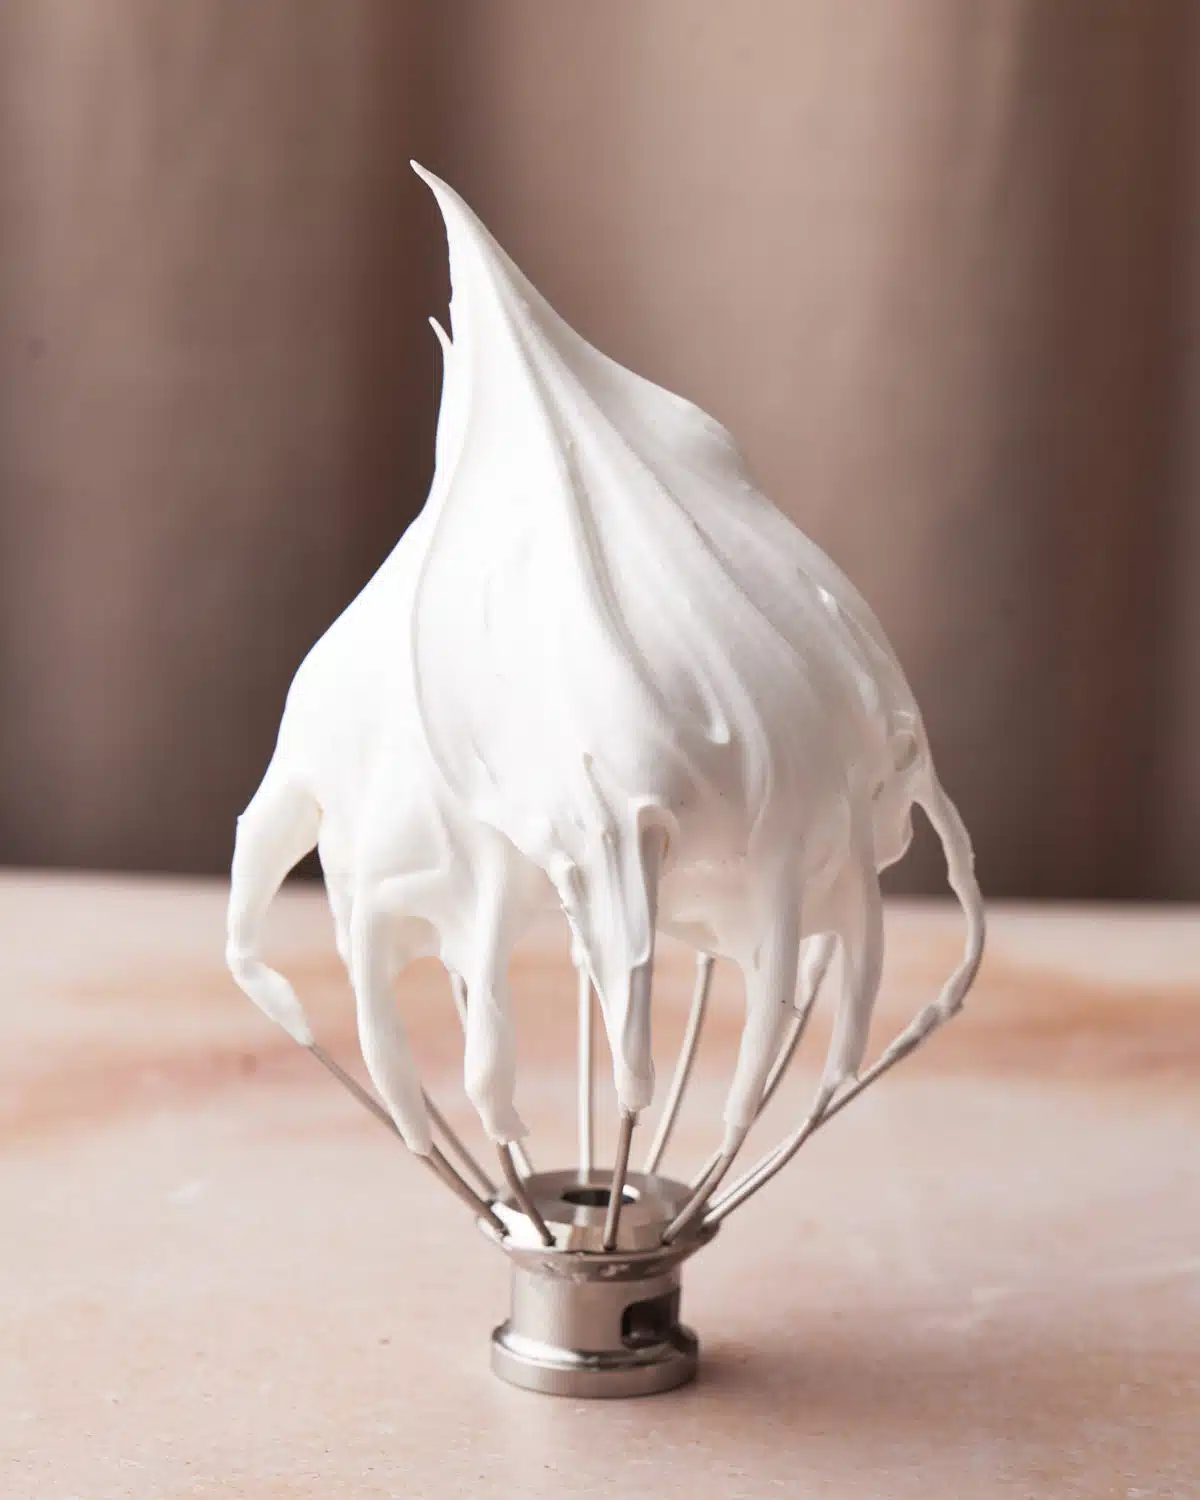 Marshmallow frosting on a stand mixer whisk.